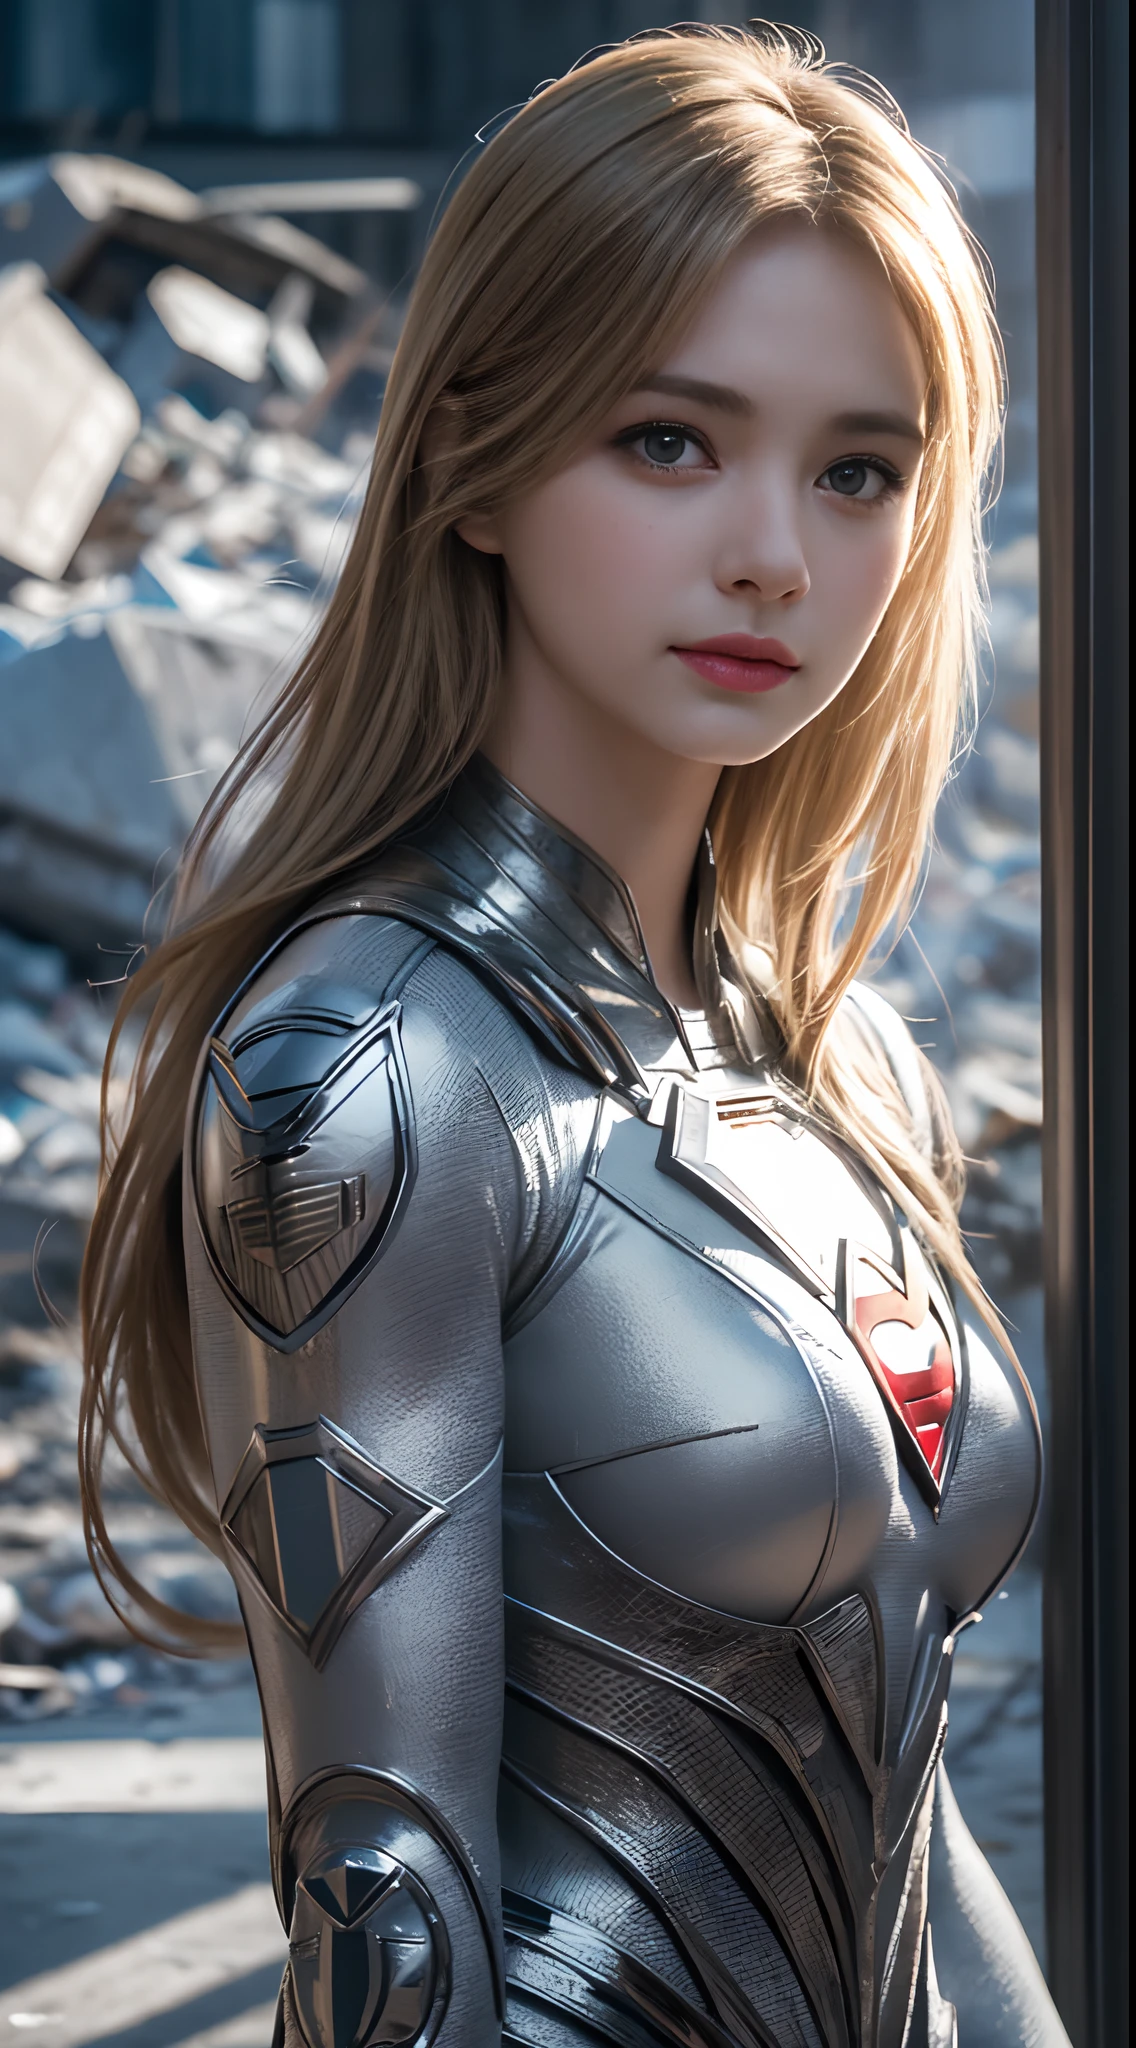 (White Superhero Theme Supergirl),( Apocalyptic city destroyed:1.4),(superchica:1.4), (gray white hair ),More detailed 8K.unreal engine:1.4,UHD,La Best Quality:1.4, photorealistic:1.4, skin texture:1.4, Masterpiece:1.8,first work, Best Quality,object object], (detailed face features:1.3), (Detailed hands:1.4),